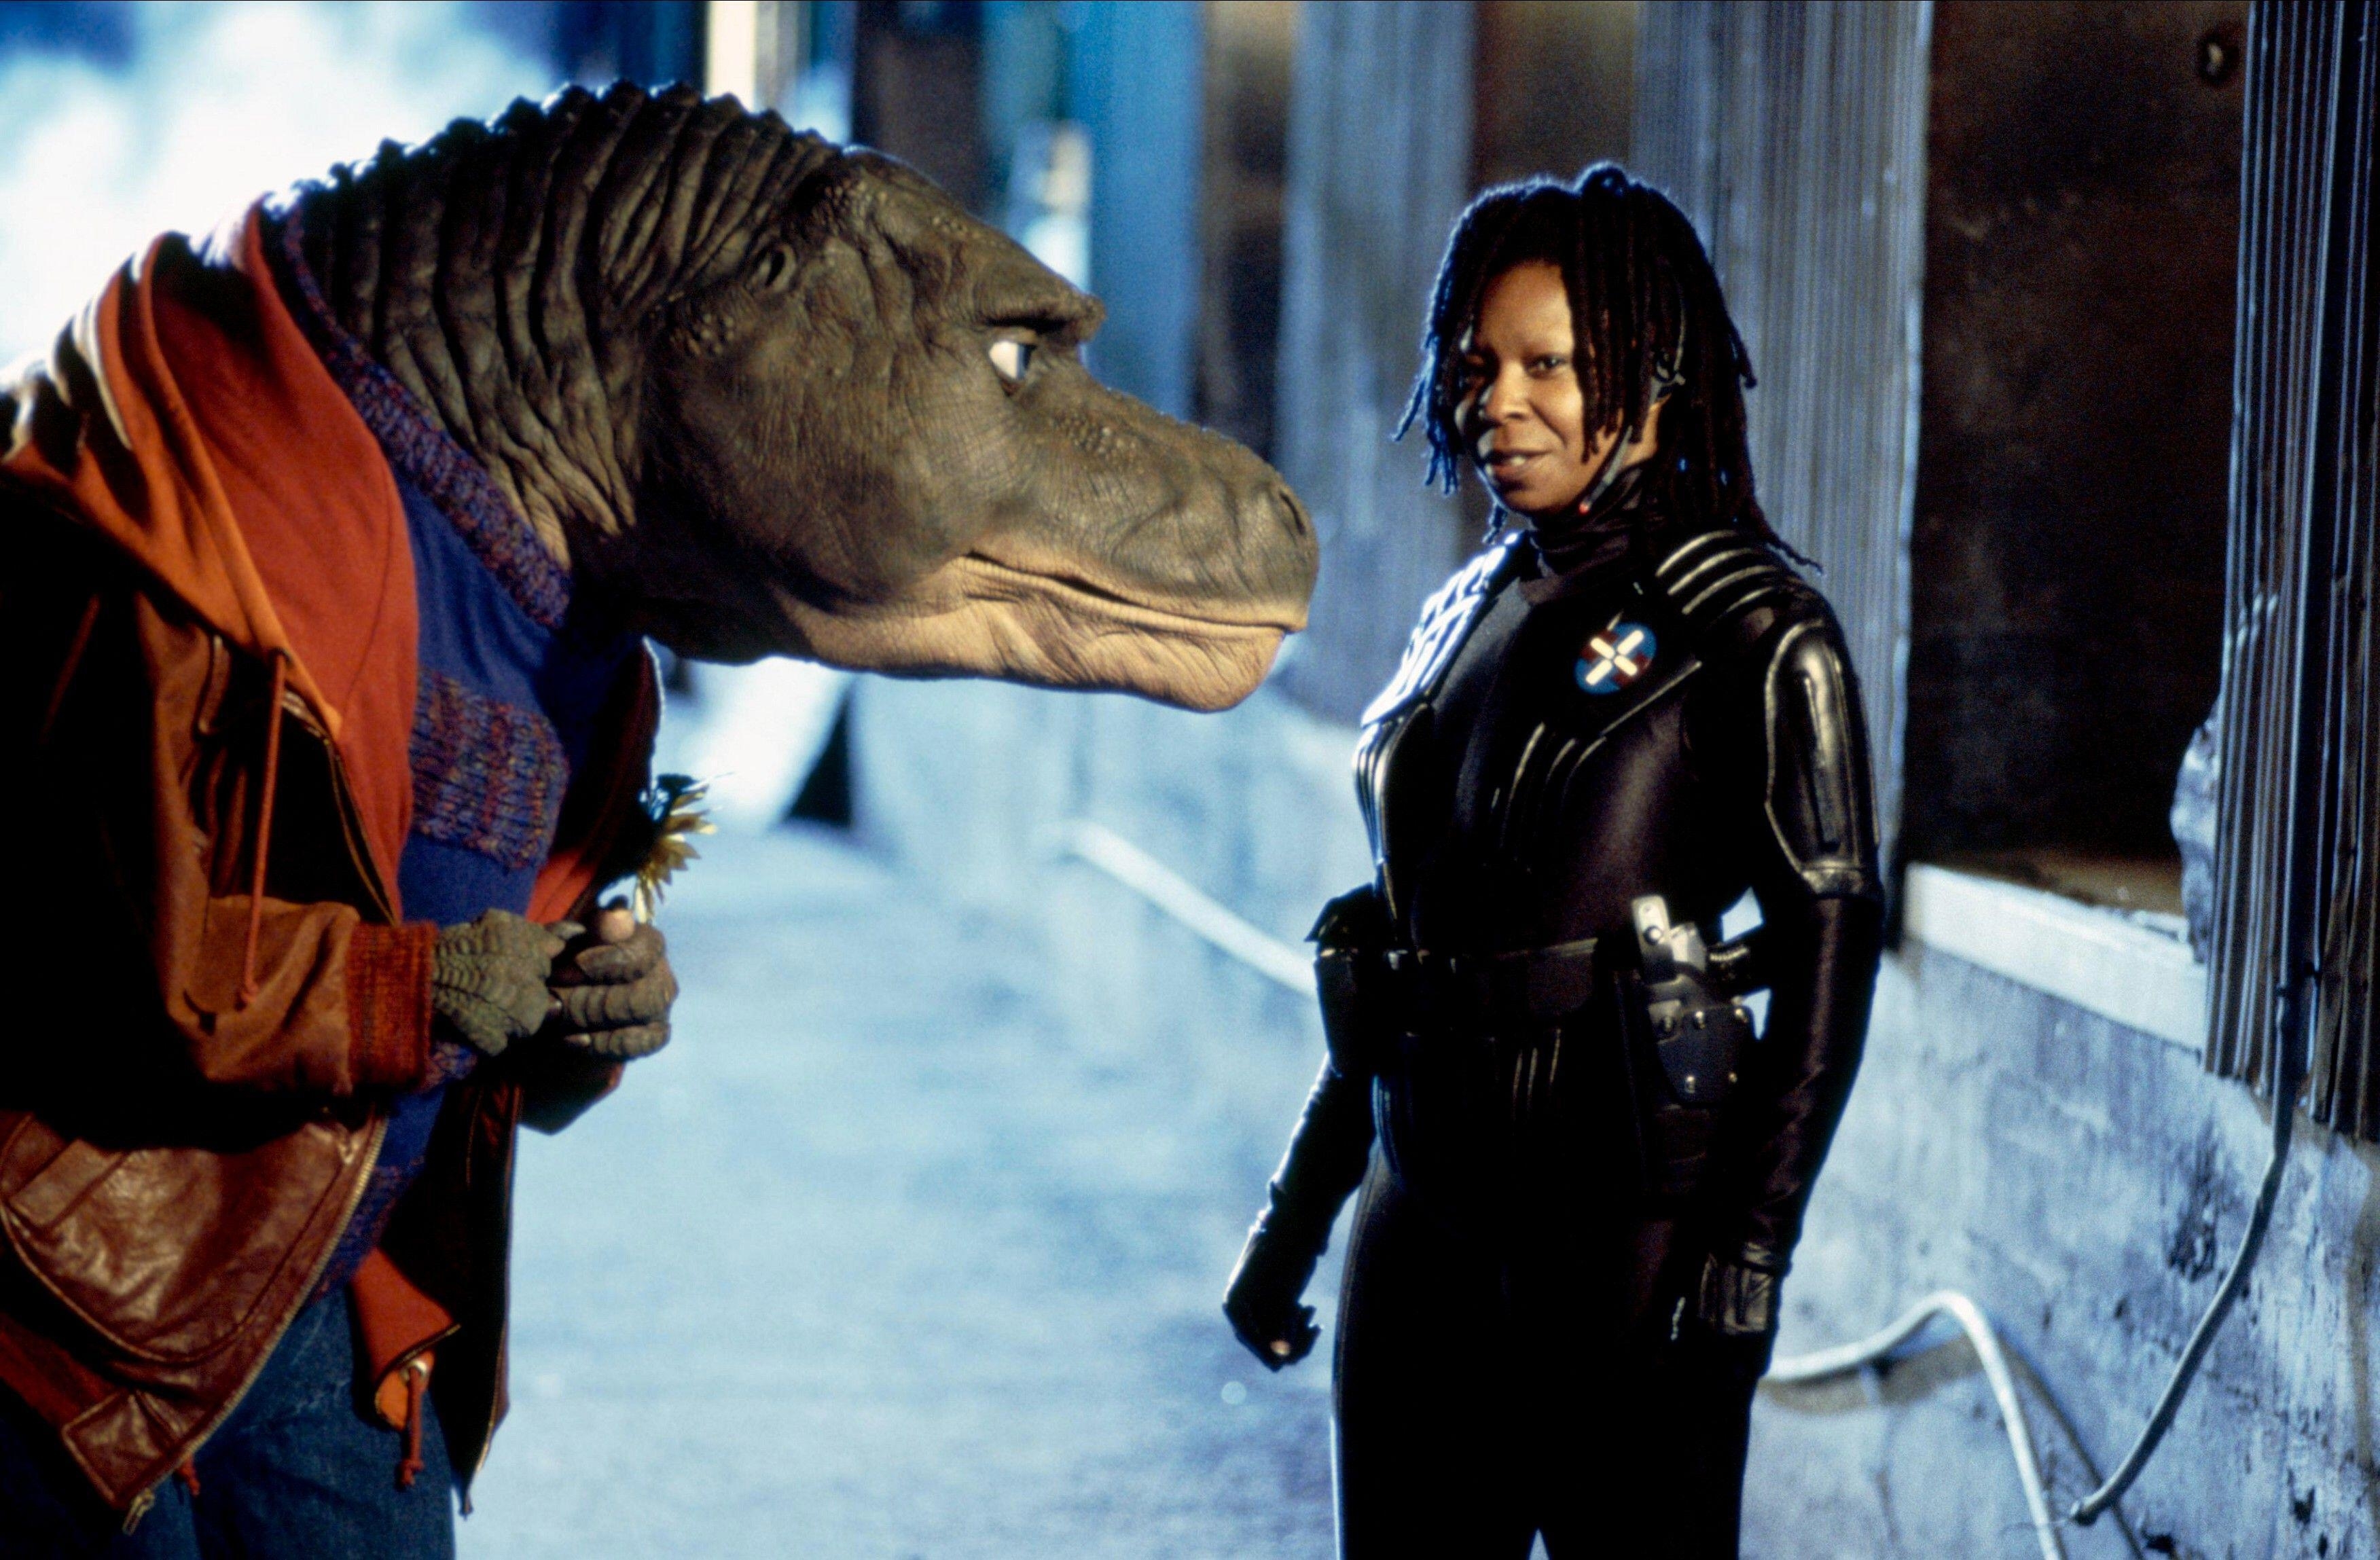 Whoopi and the dinosaur